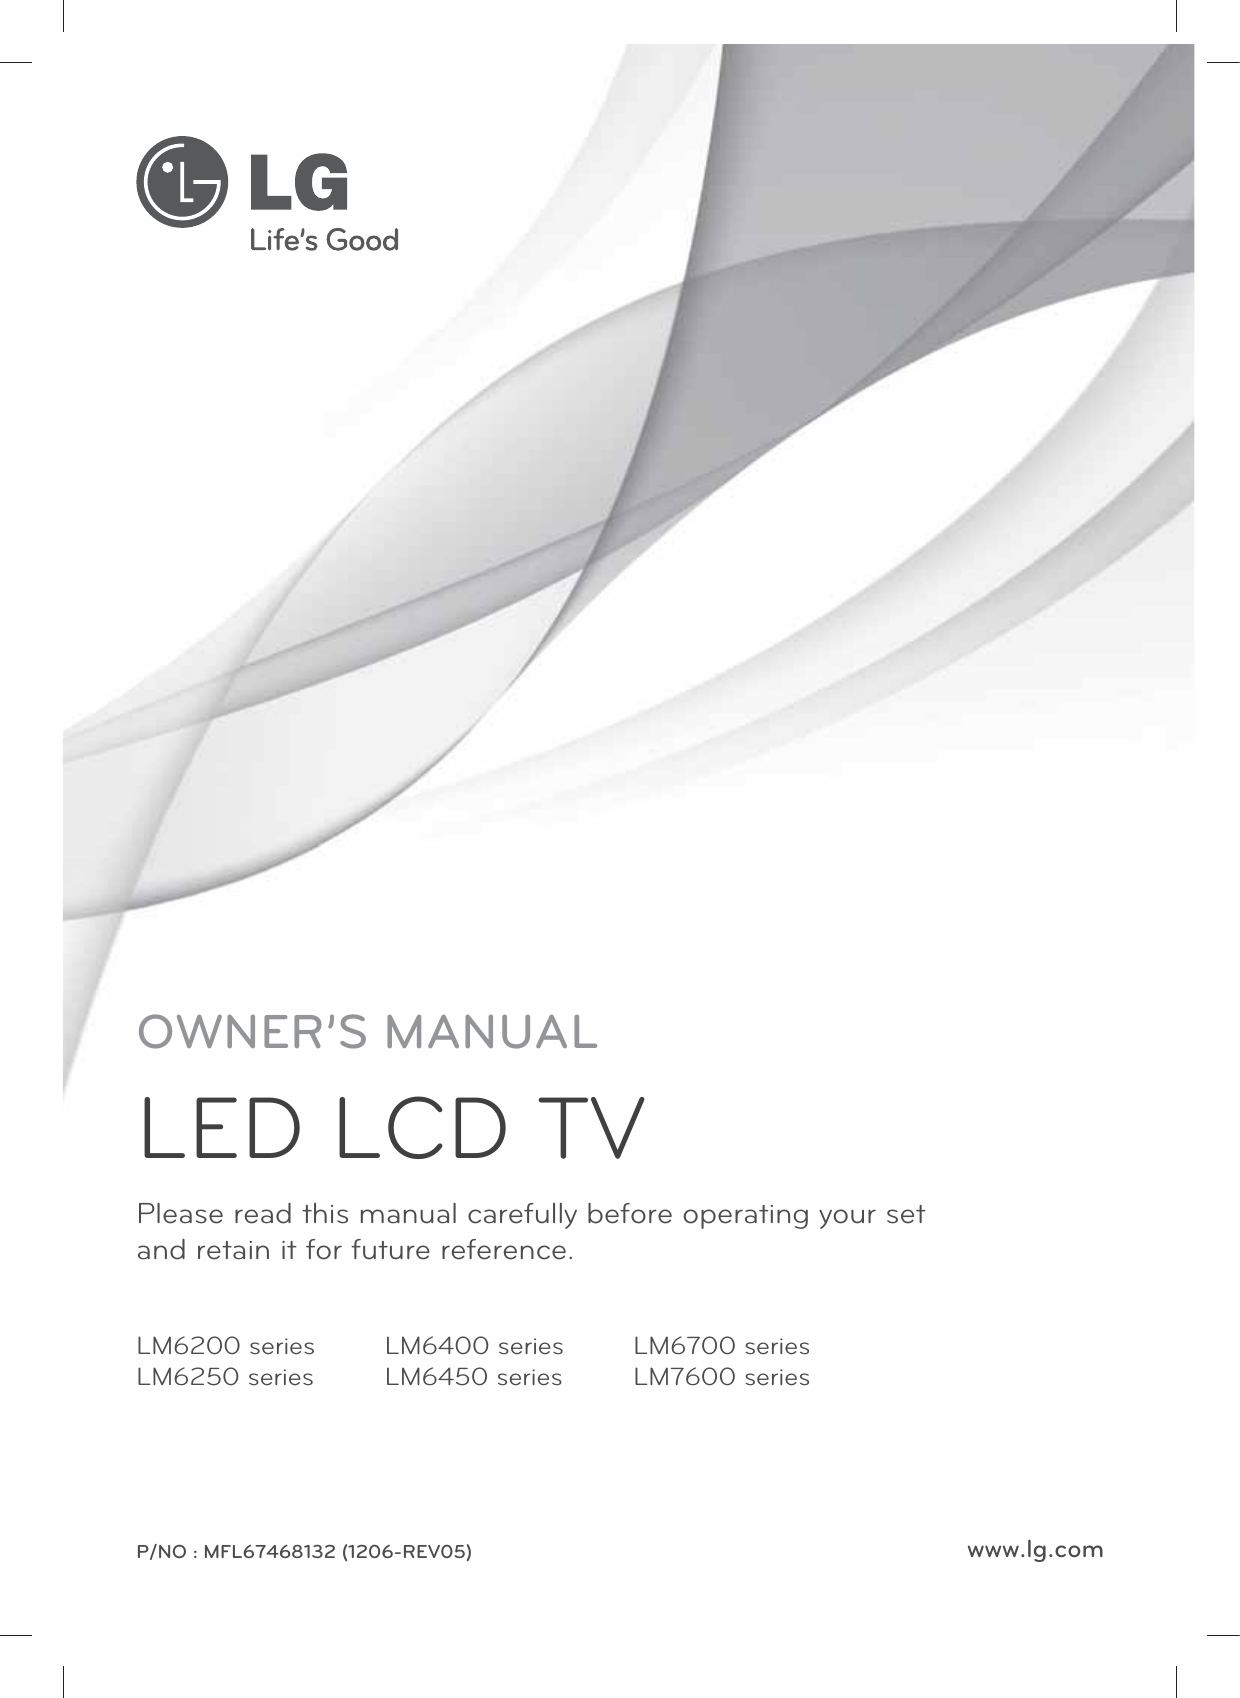 www.lg.comPlease read this manual carefully before operating your set  and retain it for future reference.P/NO : MFL67468132 (1206-REV05)OWNER’S MANUALLED LCD TVLM6200 seriesLM6250 seriesLM6400 seriesLM6450 seriesLM6700 seriesLM7600 series